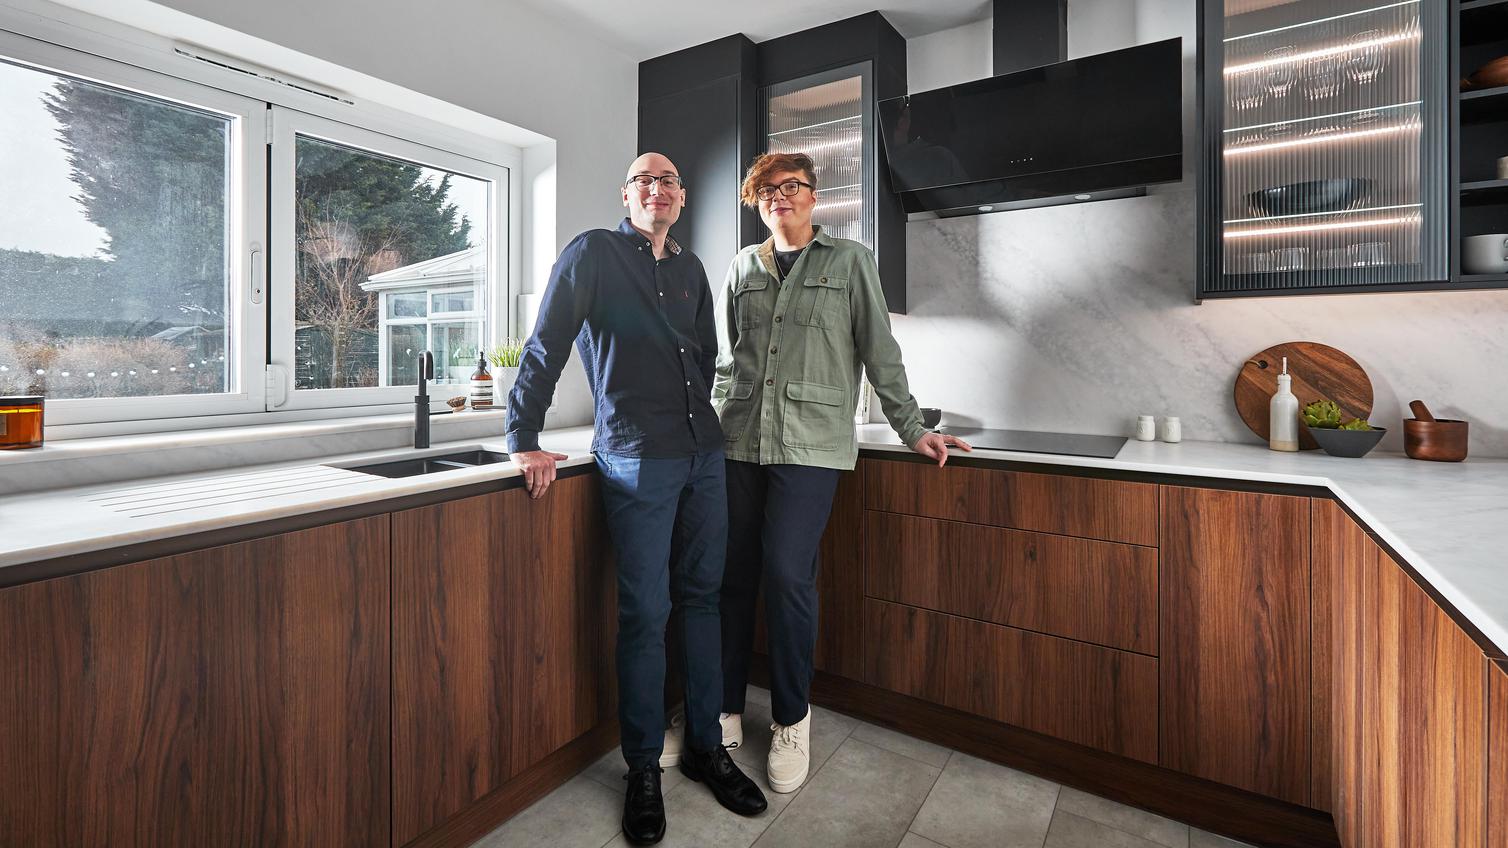 Josh and Dan standing in their kitchen which contains black wall cupboards with fluted glass doors and handleless walnut units.